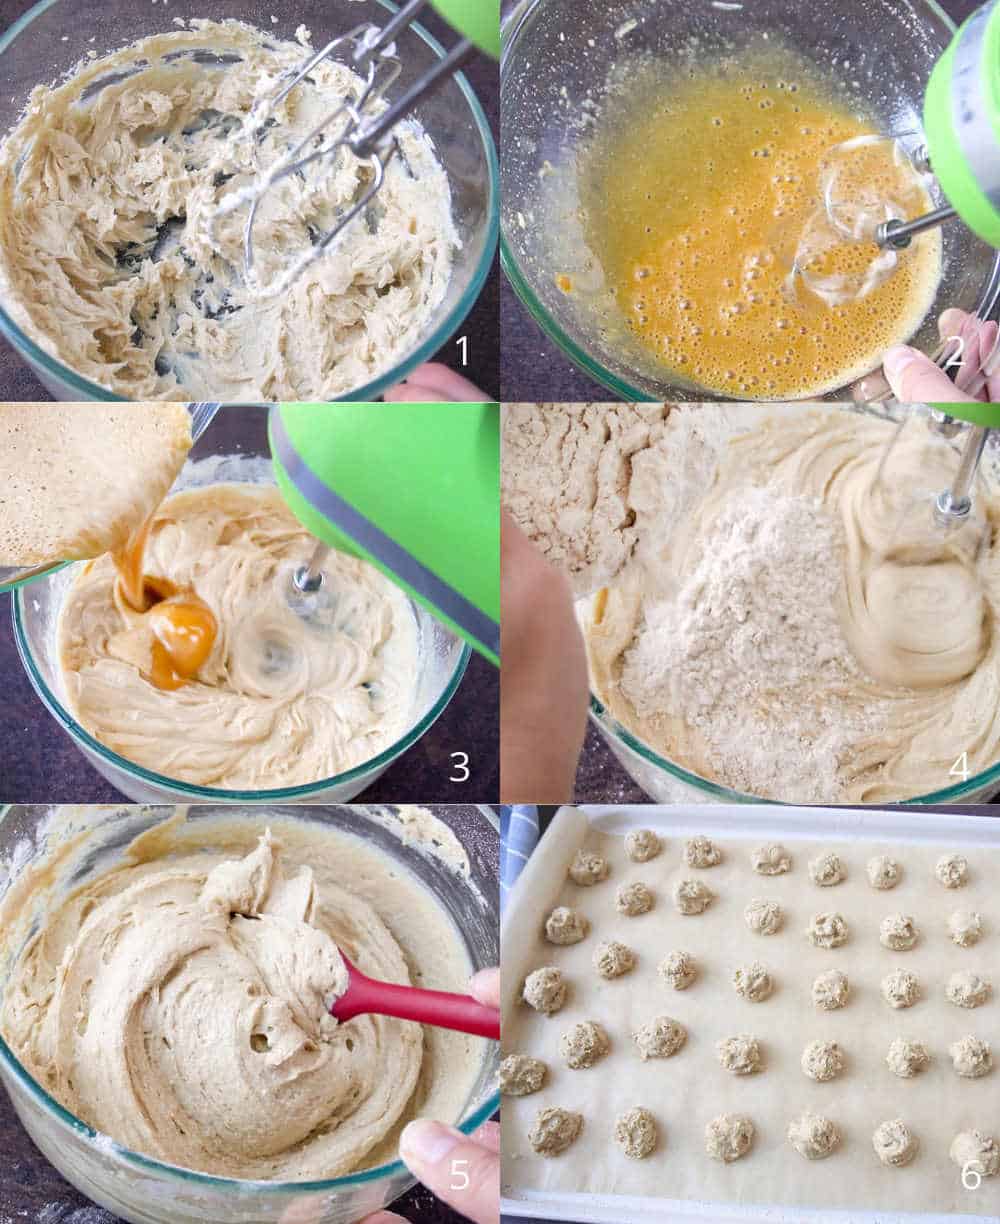 Process shots showing how To Make Gluten Free Vanilla Wafers Recipe " Nilla Wafer" Gluten free wafer cookies.